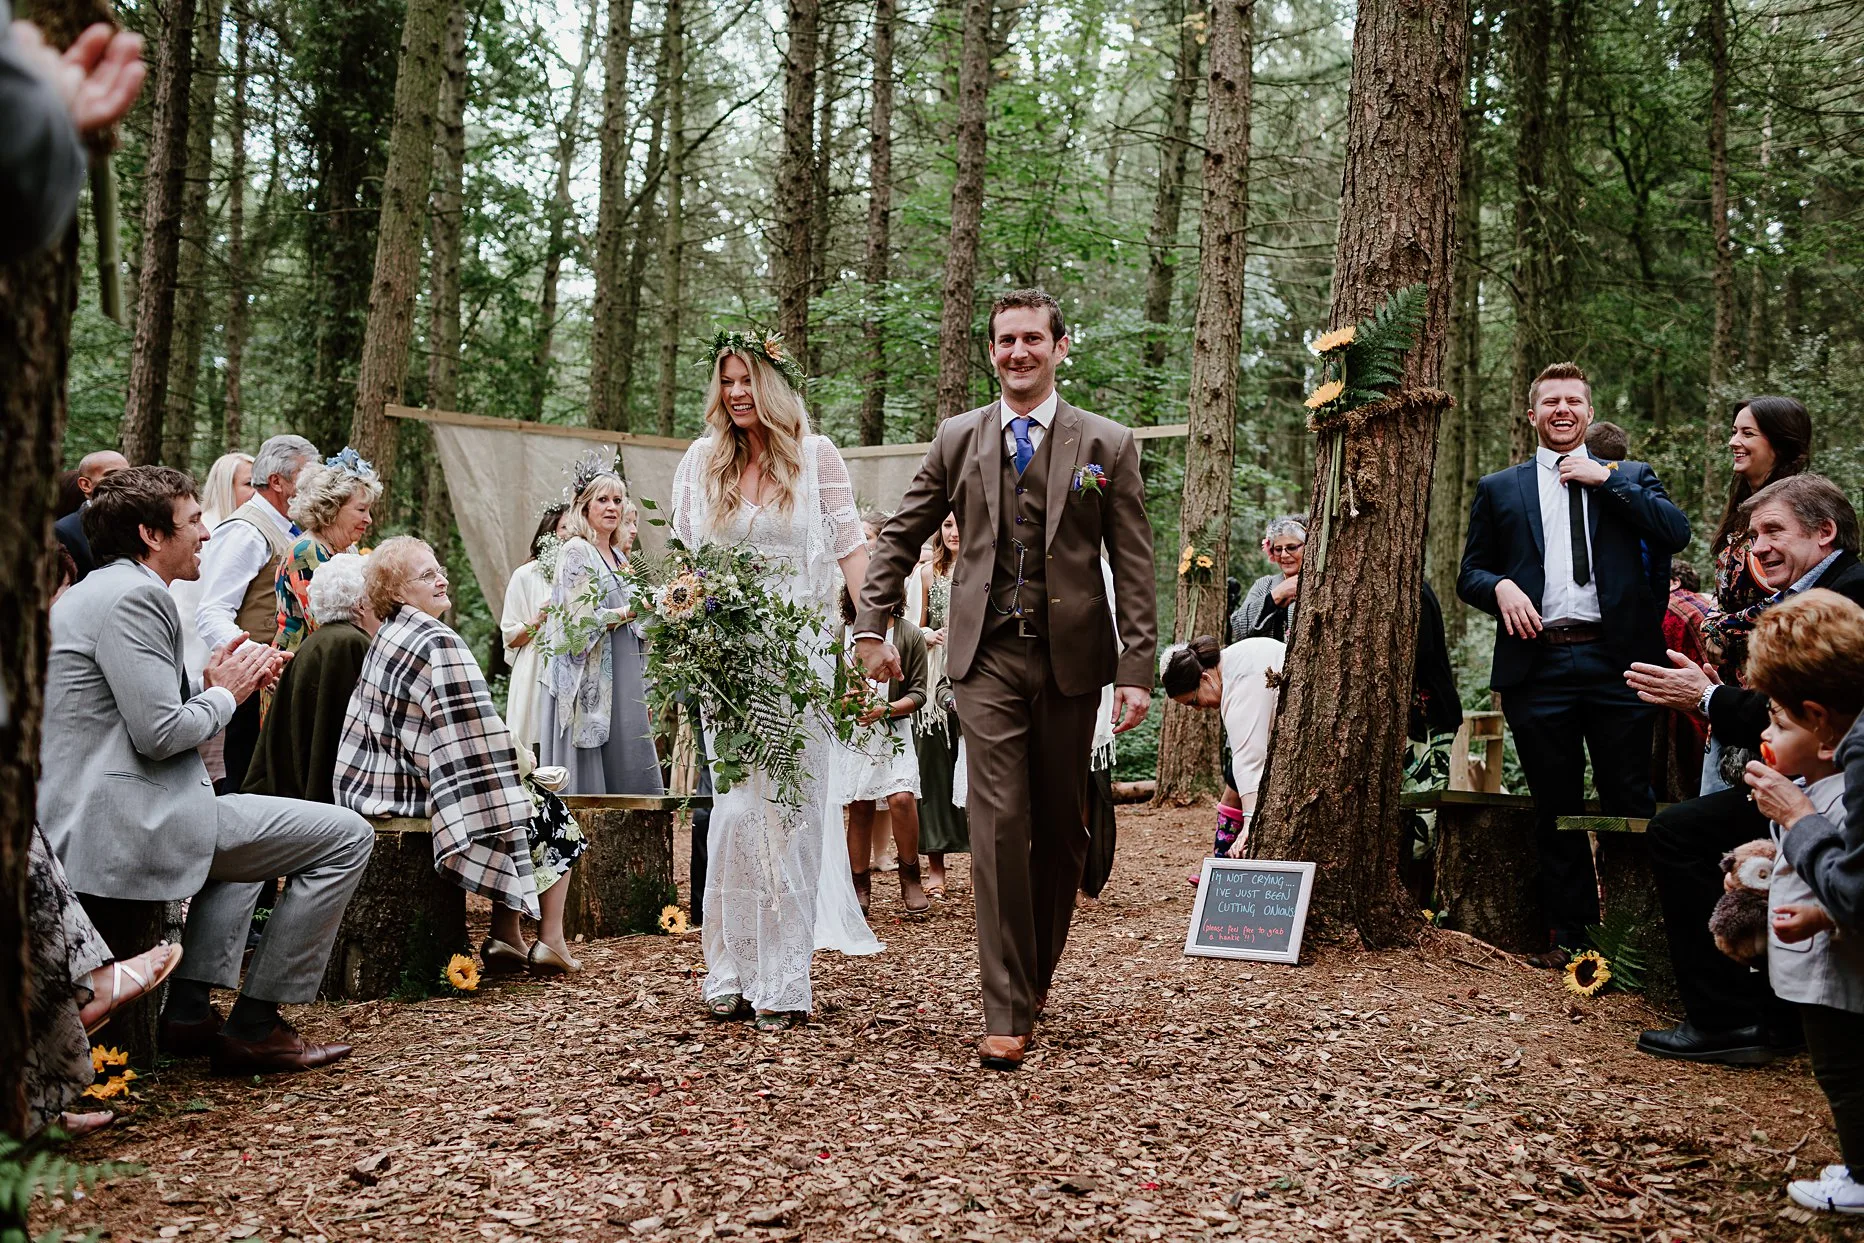 Bride and groom walking back down the aisle after outdoor wedding ceremony at the woodland chapel, Camp Katur. Guests are clapping and smiling and everyone is surrounded by trees.